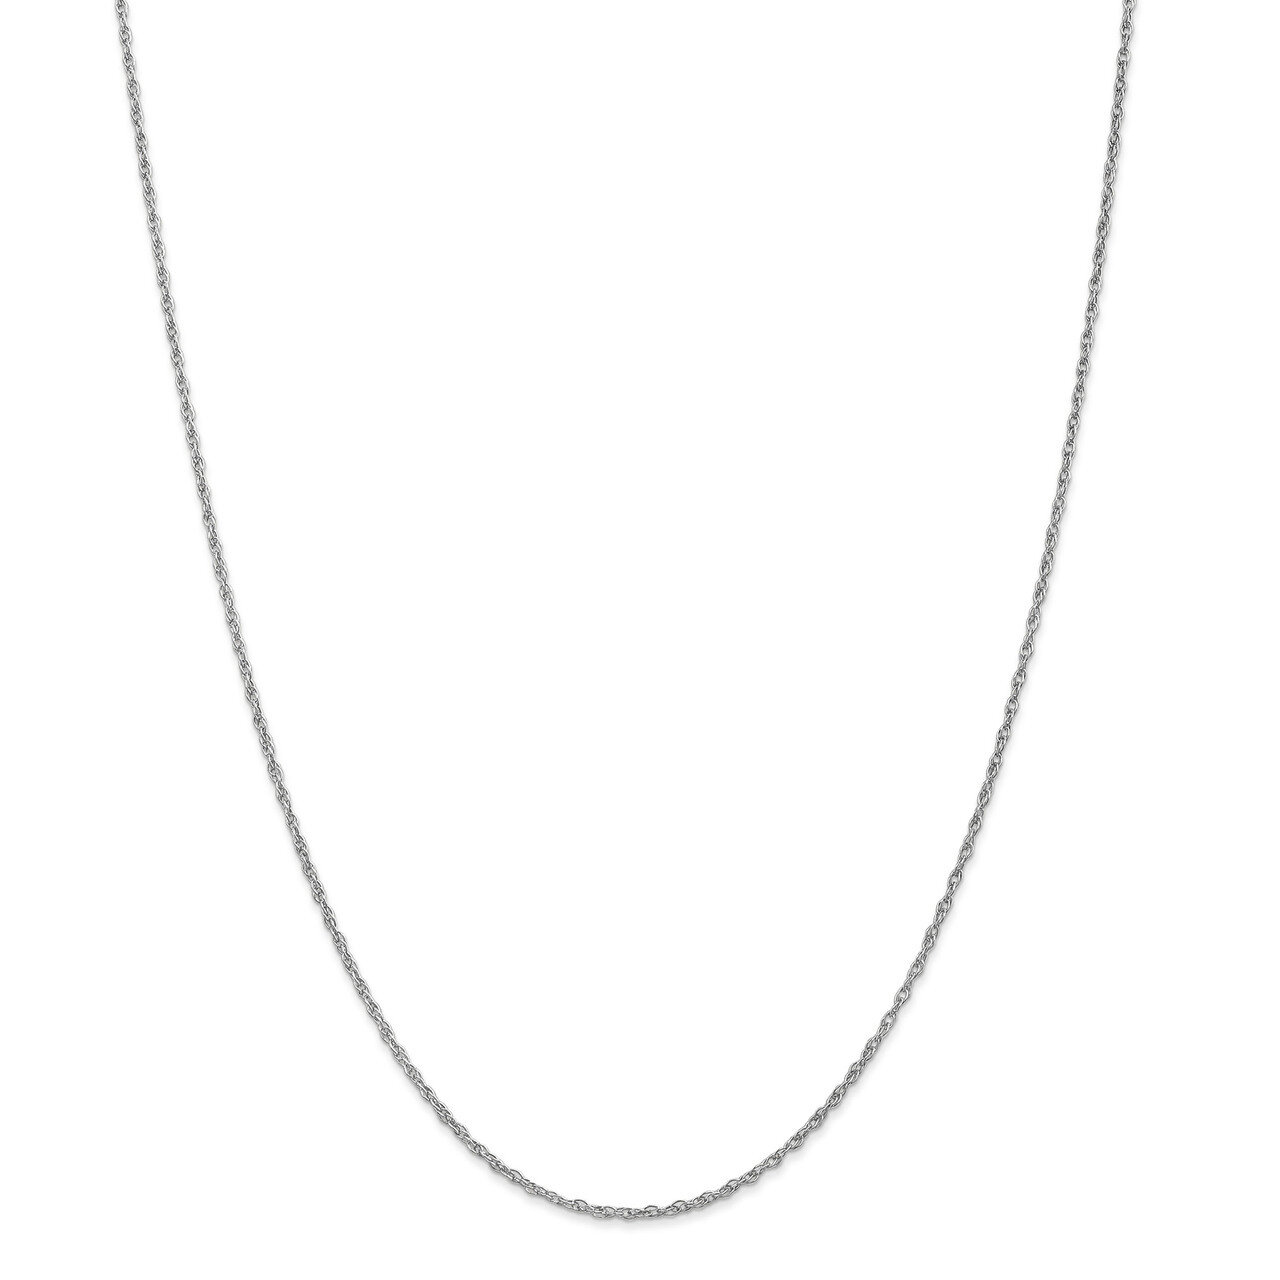 1.5 mm Pendant Rope Chain 24 Inch 14K White Gold HB-7157-24